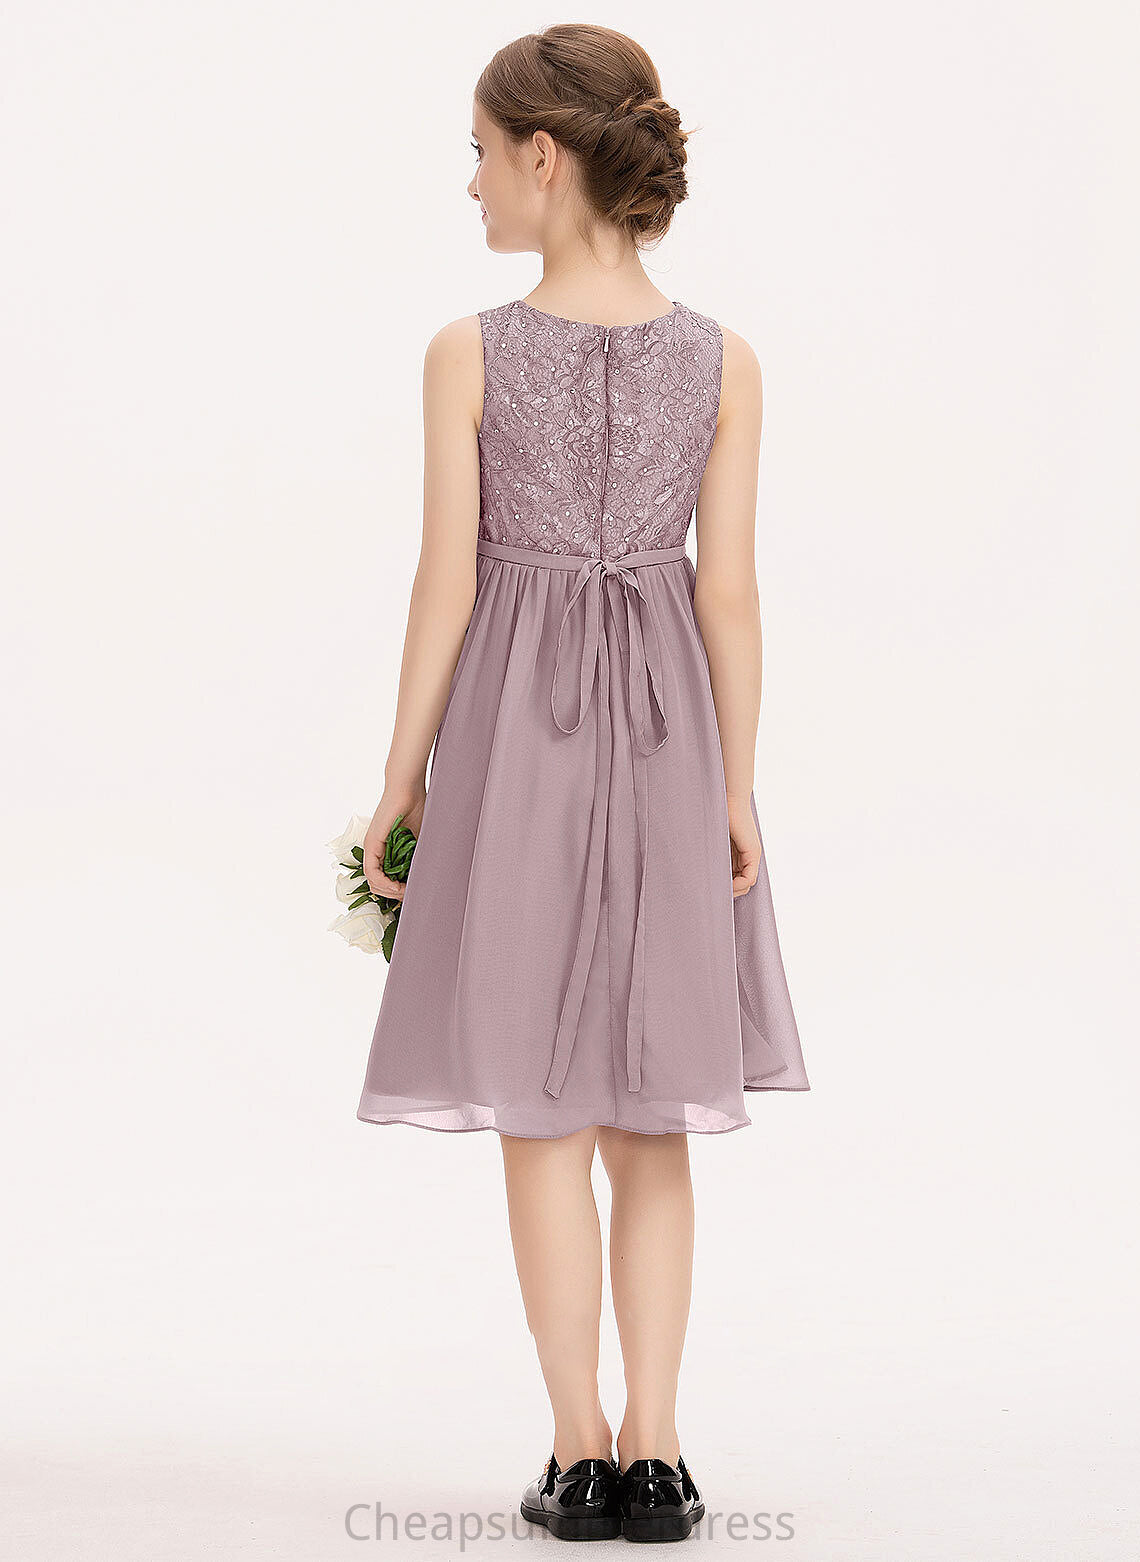 A-Line Scoop Neck With Amanda Knee-Length Lace Junior Bridesmaid Dresses Bow(s) Chiffon Beading